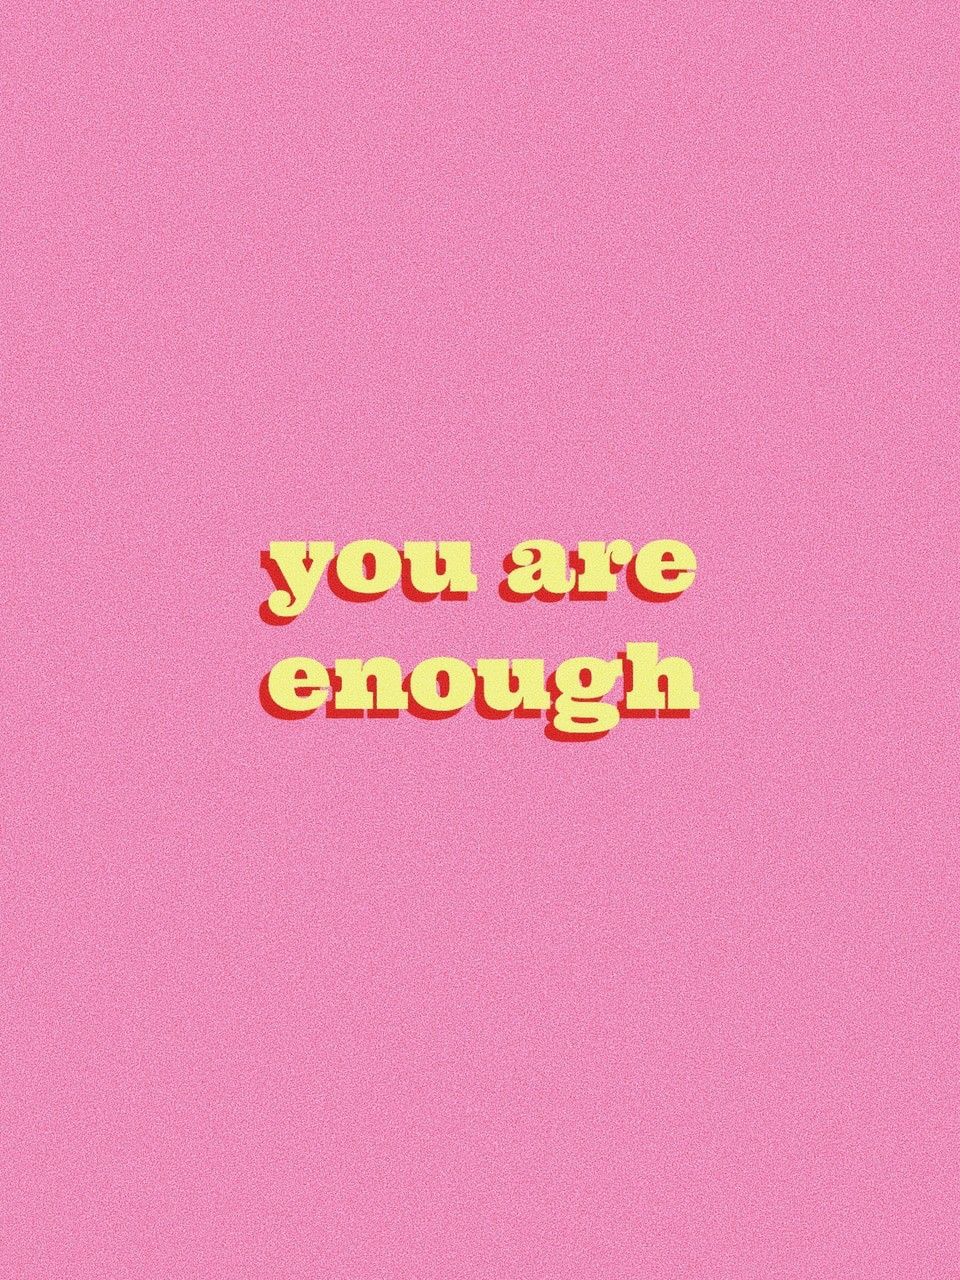 You are enough¡ uploaded